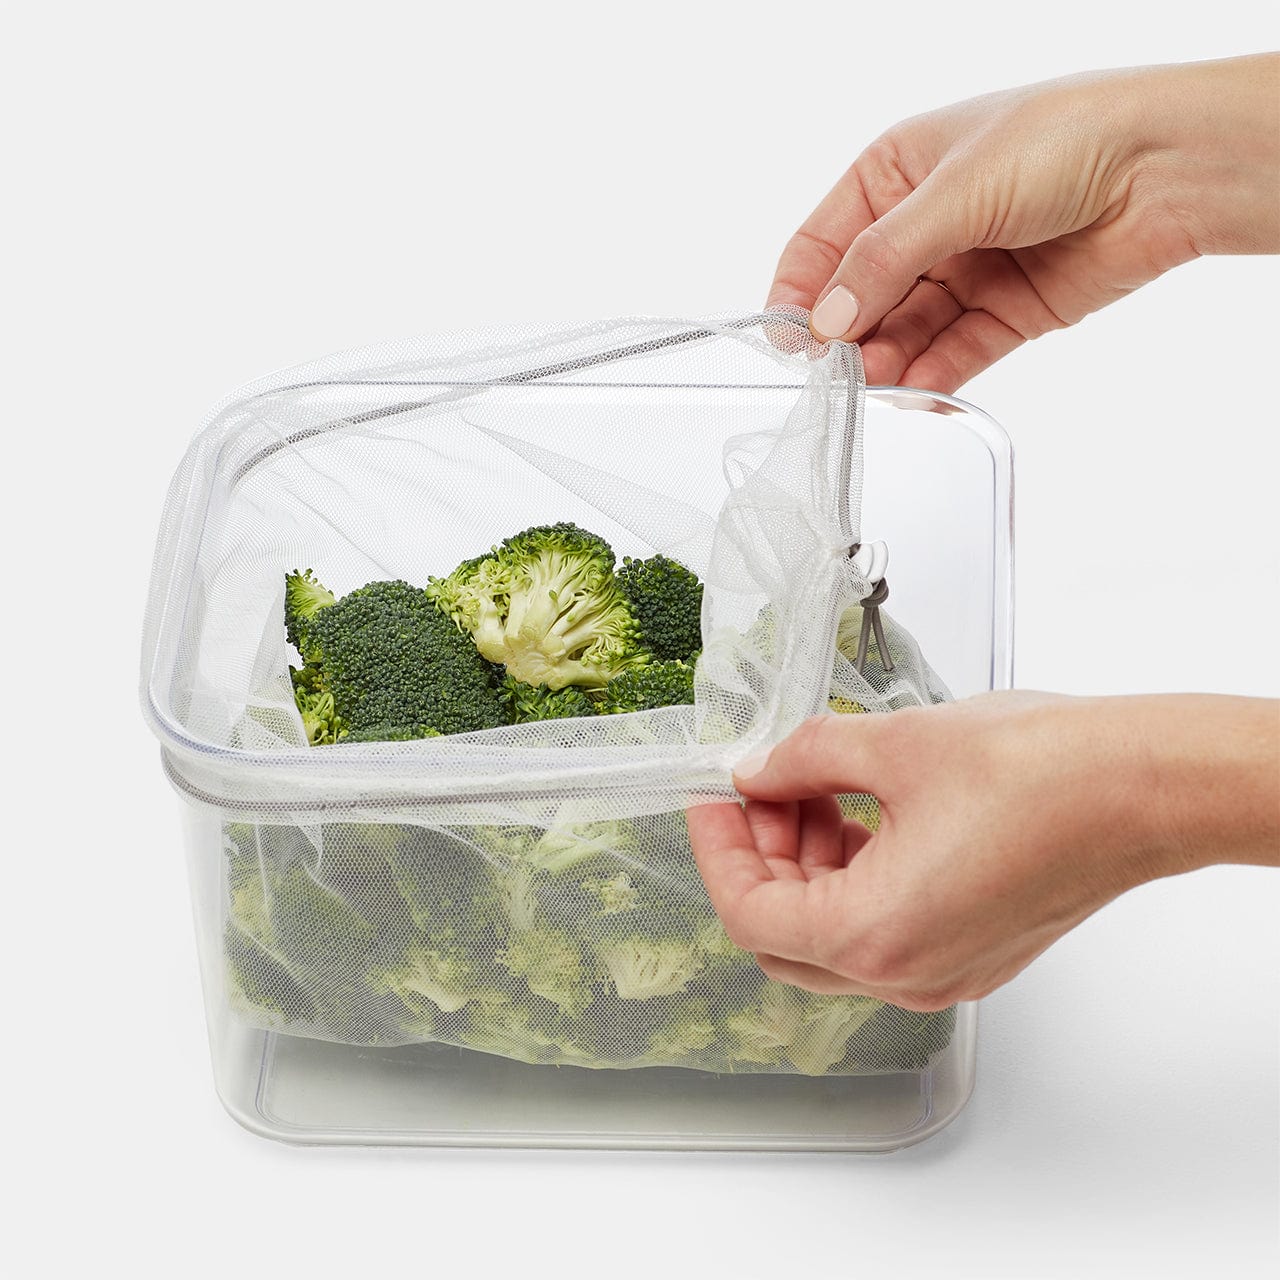 Chef'n Produce Storage Container - Avocado